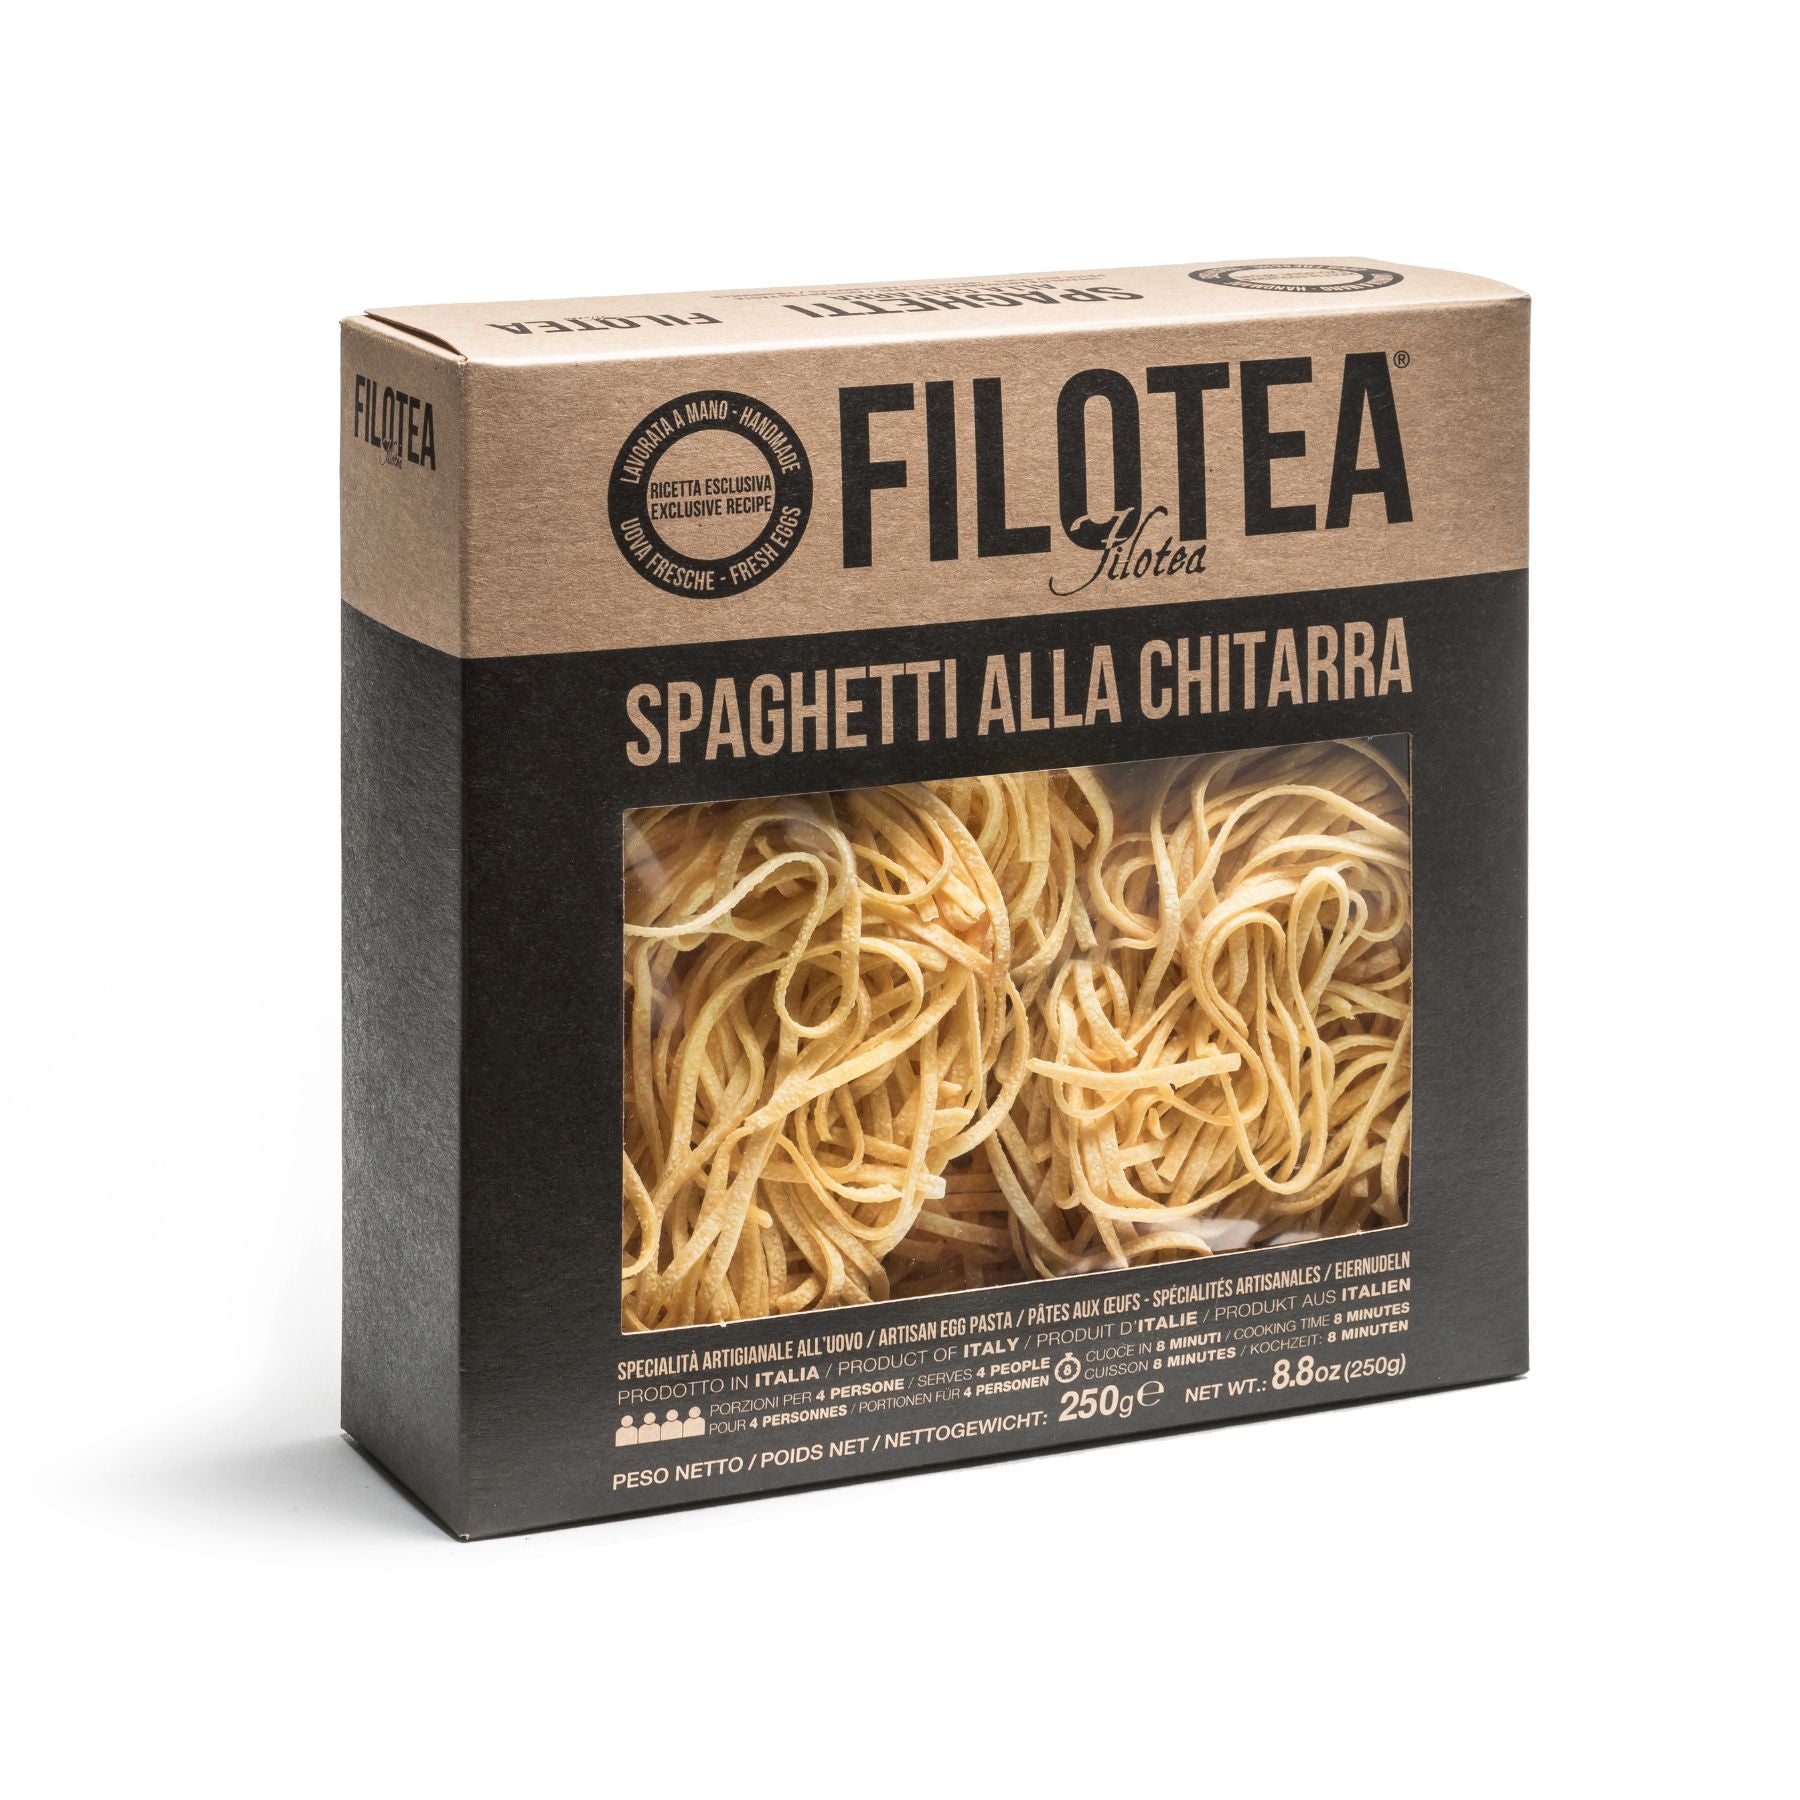 Filotea Le Matassine Spaghetti alla Chitarra Nest Artisan Egg Pasta 250g | Imported and distributed in the UK by Just Gourmet Foods